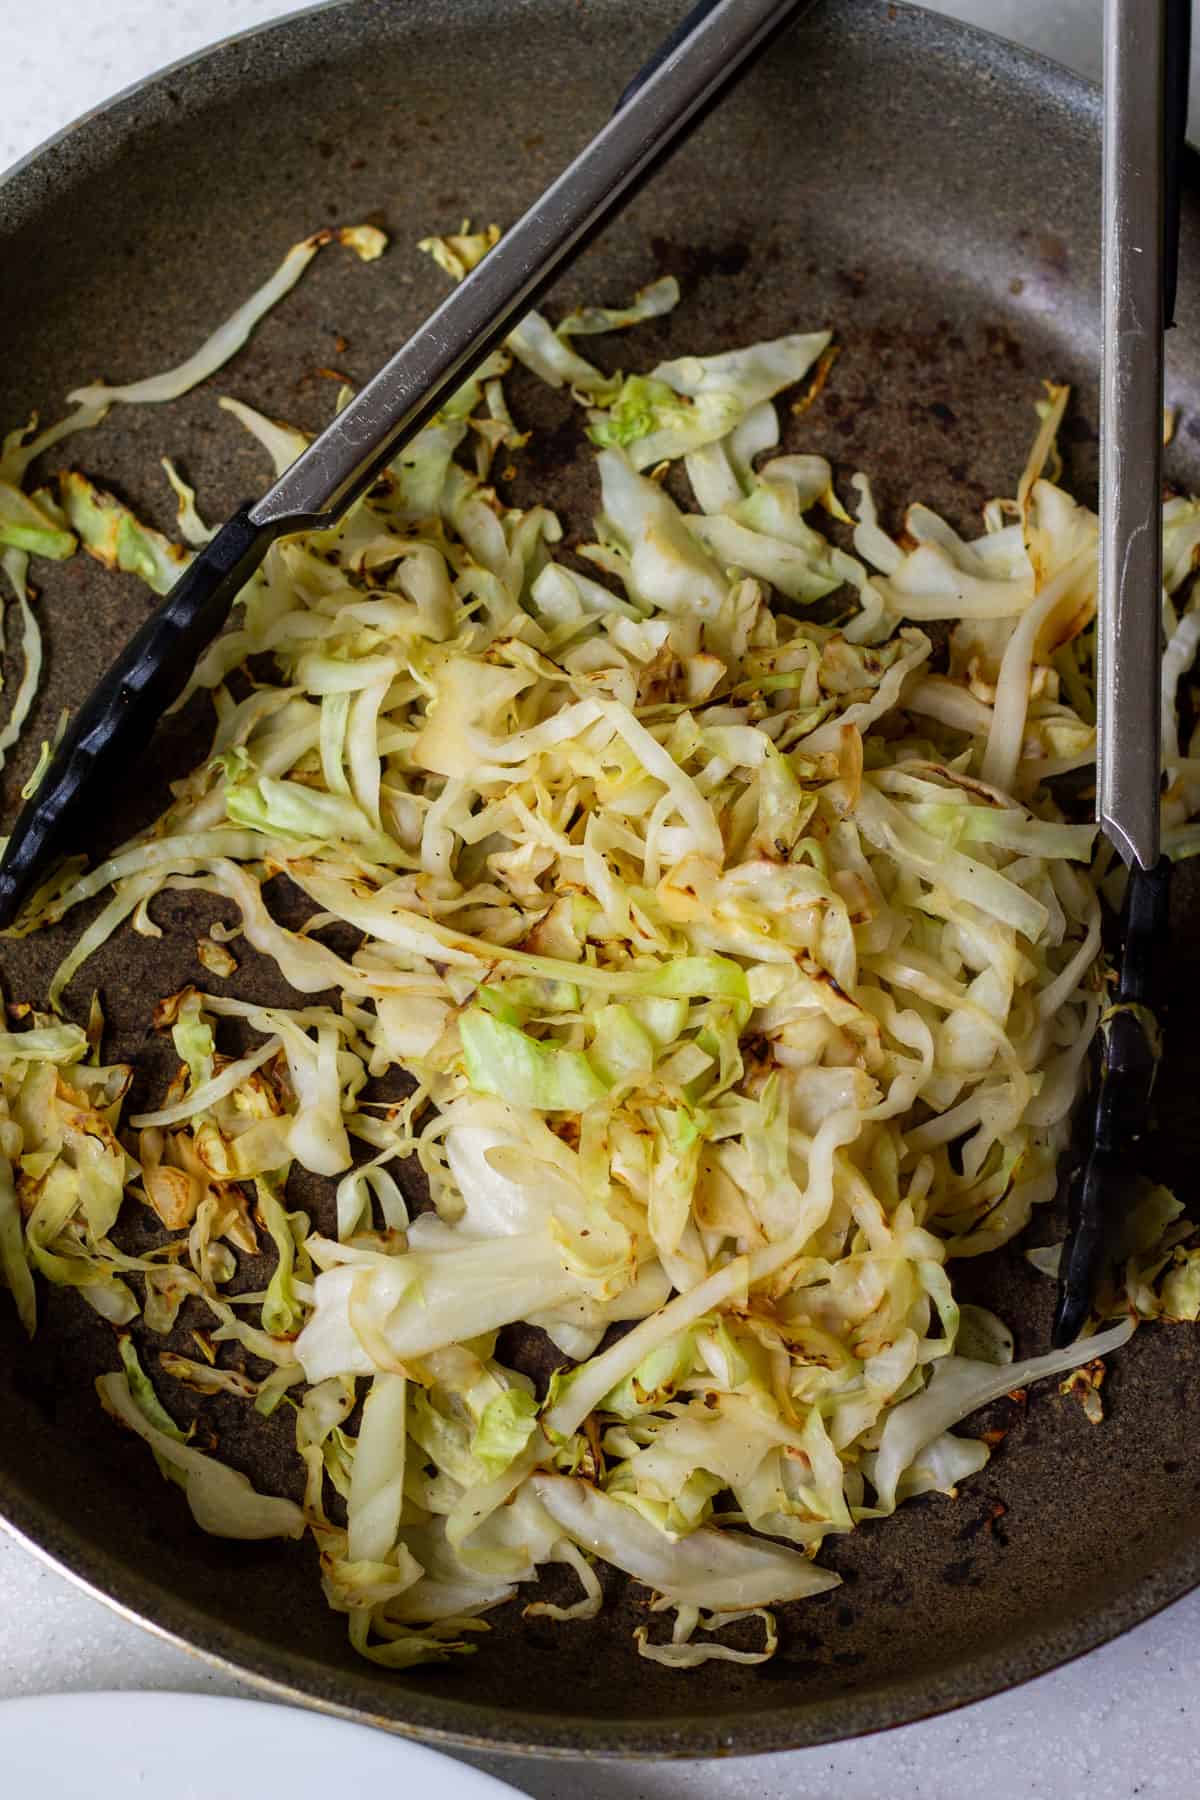 pan-seared green cabbage strips charred in a skillet on the stove, with tongs